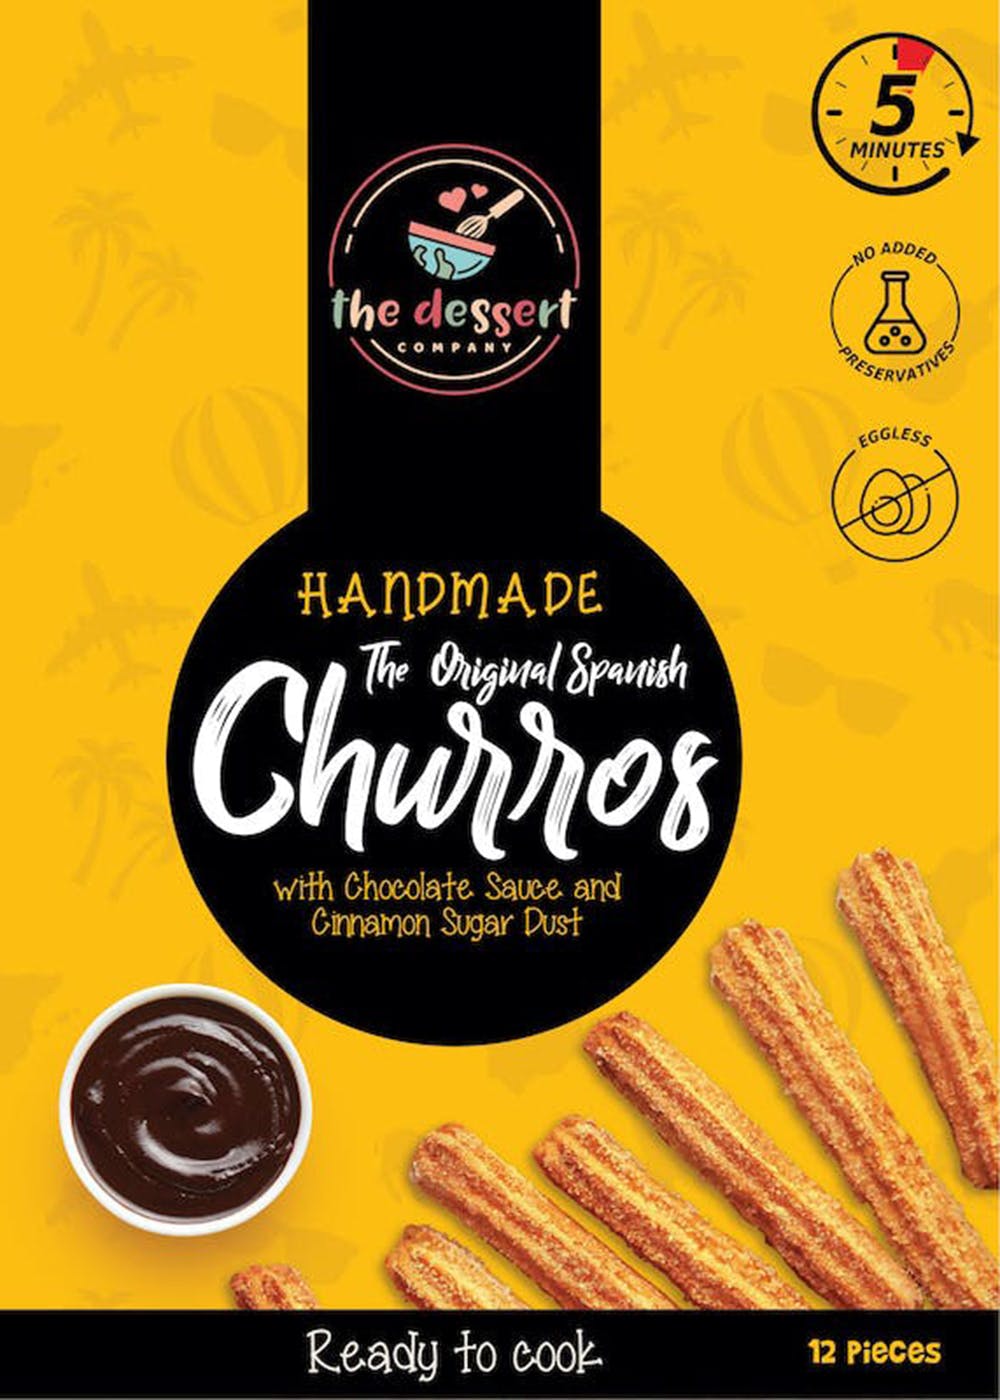 Ready to Cook - Spanish Churros (20 Churros with Chocolate Sauce and Cinnamon Dust) - 400gm